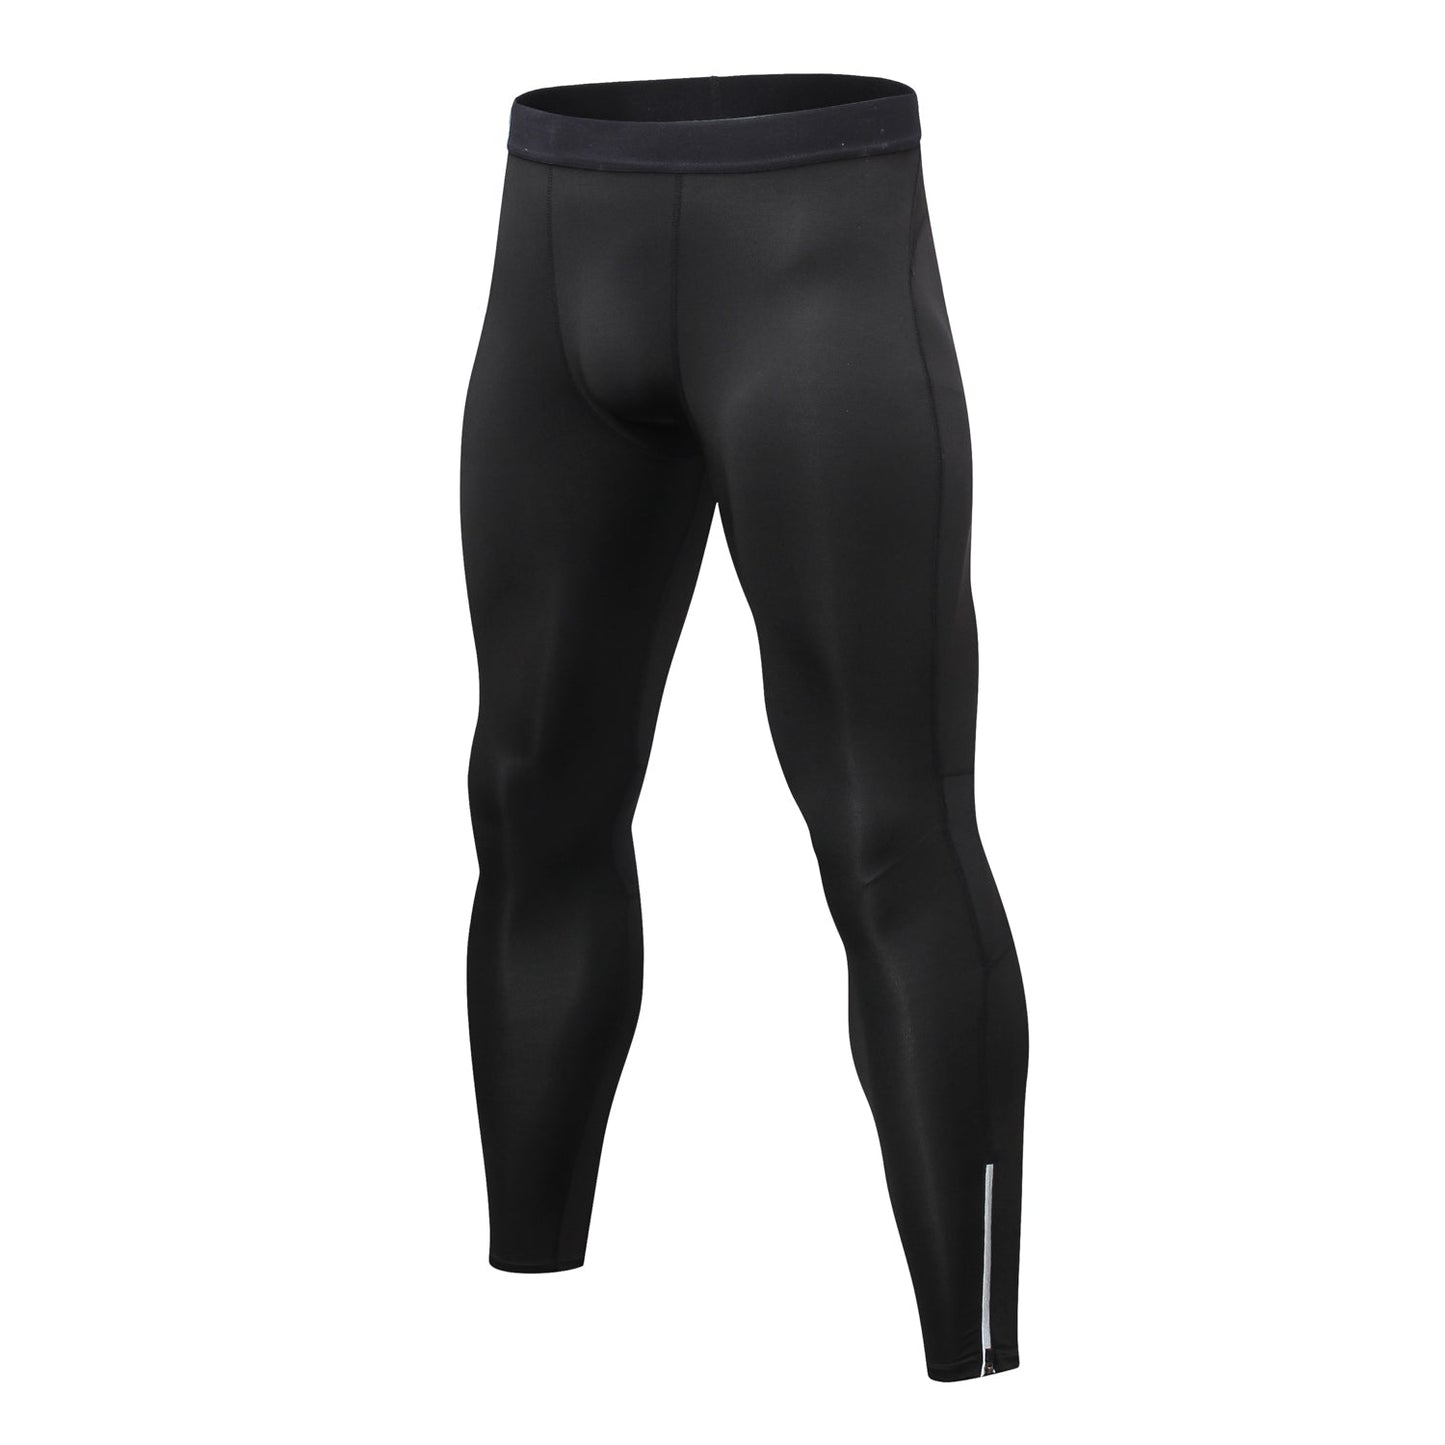 Mens Compression Running Leggings Athletic Tights with Phone Pocket - Black  - CH18MEAZUON Size Fits Like US S